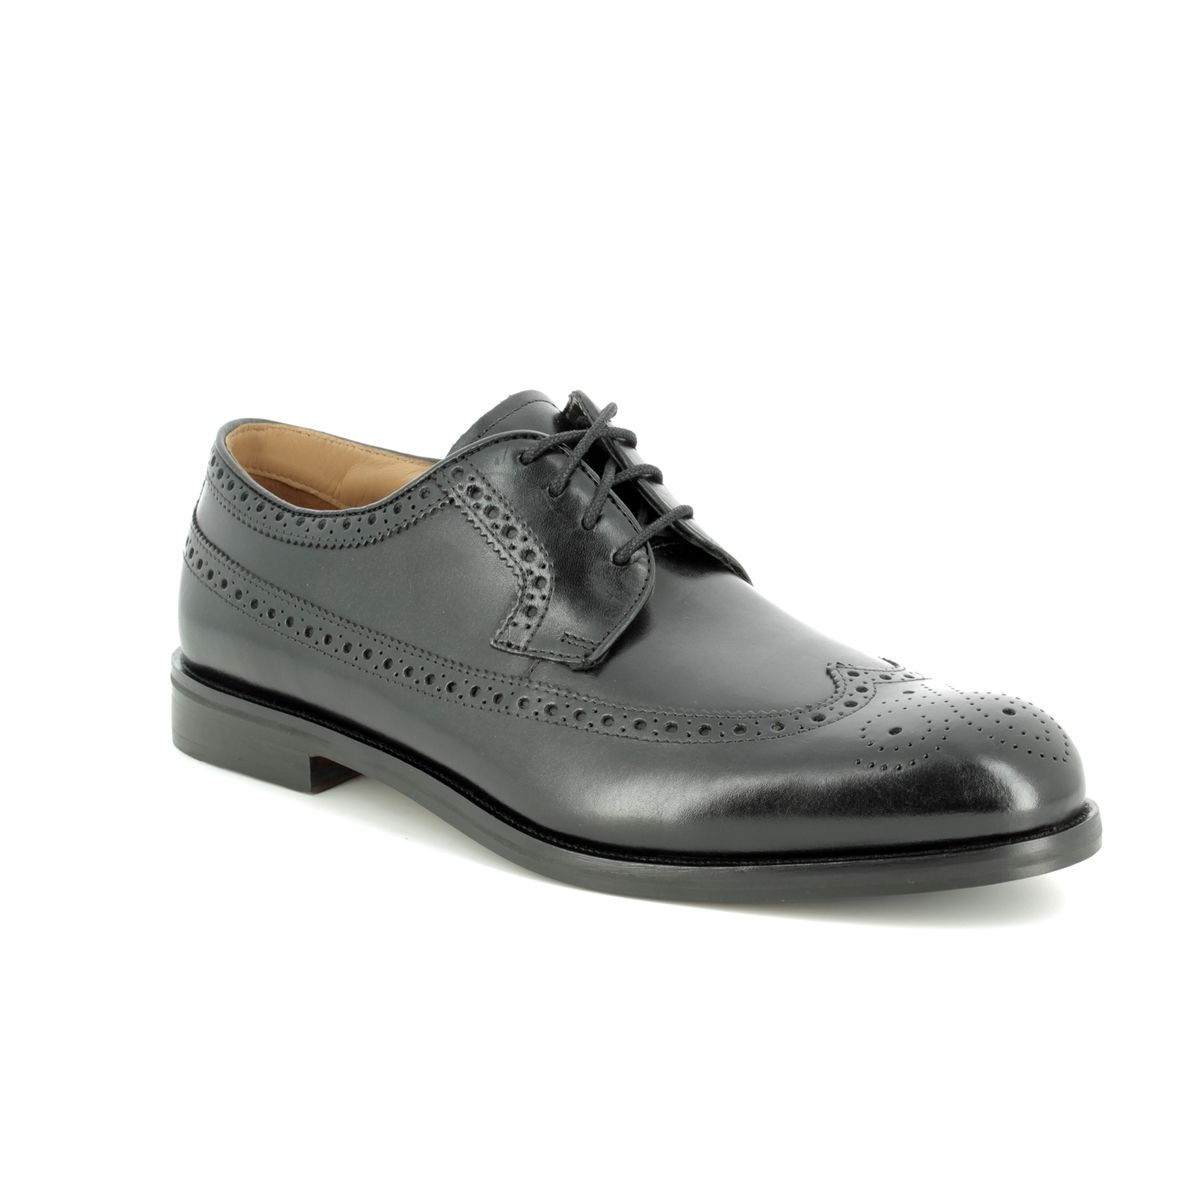 clarks brogues wide fit